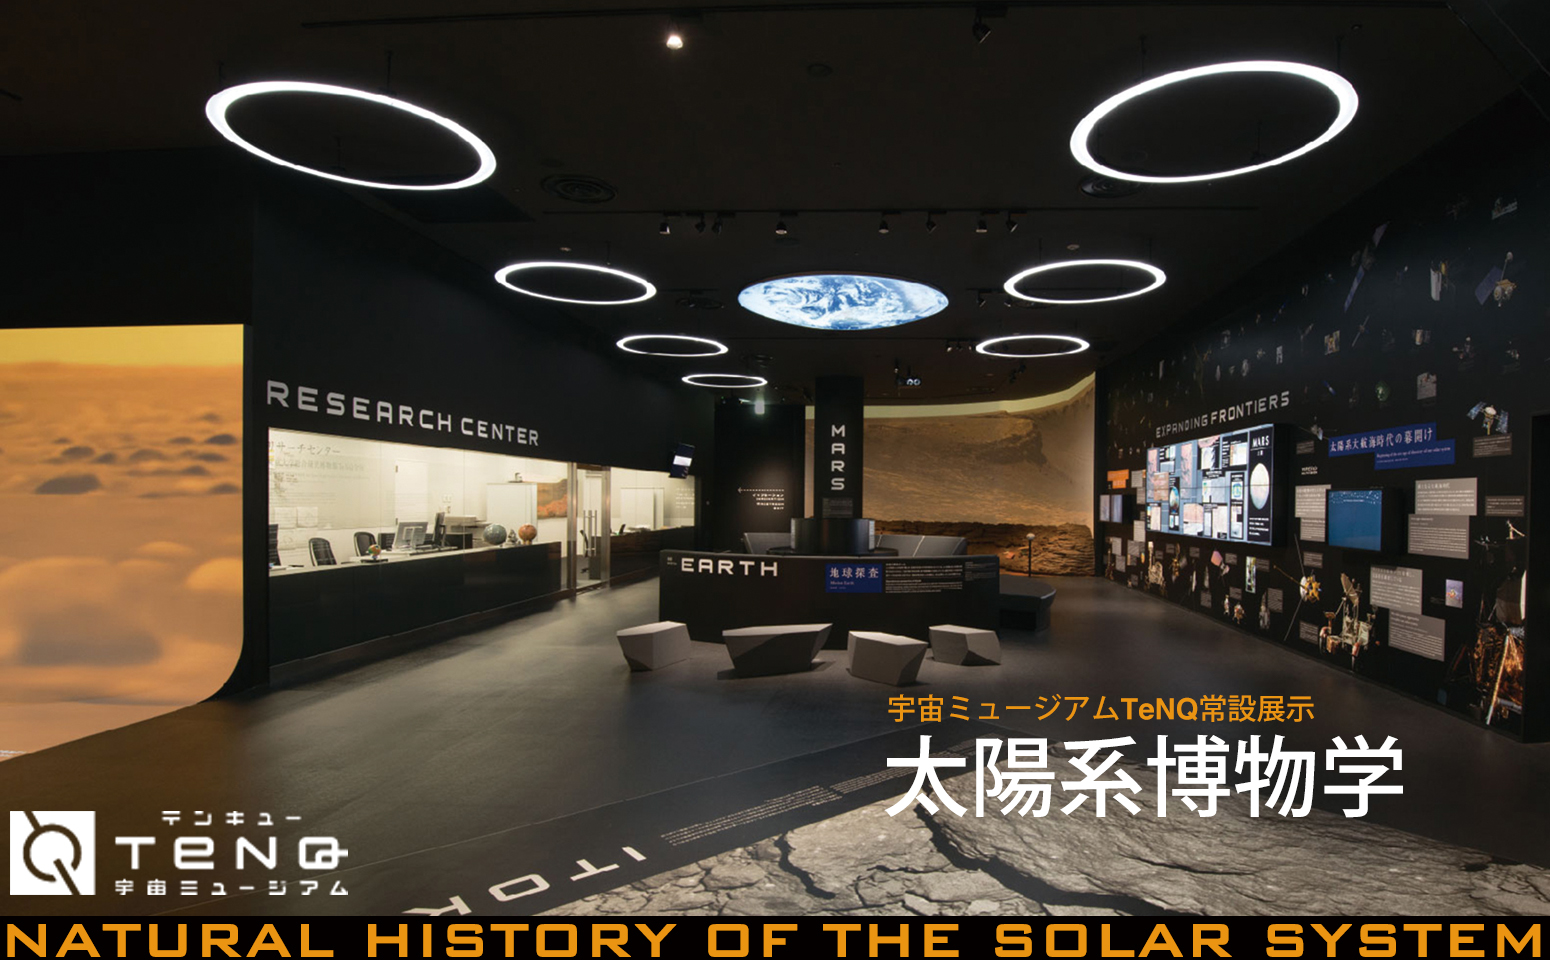 TeNQ Permanent Exhibition "Natural History of the Solar System"